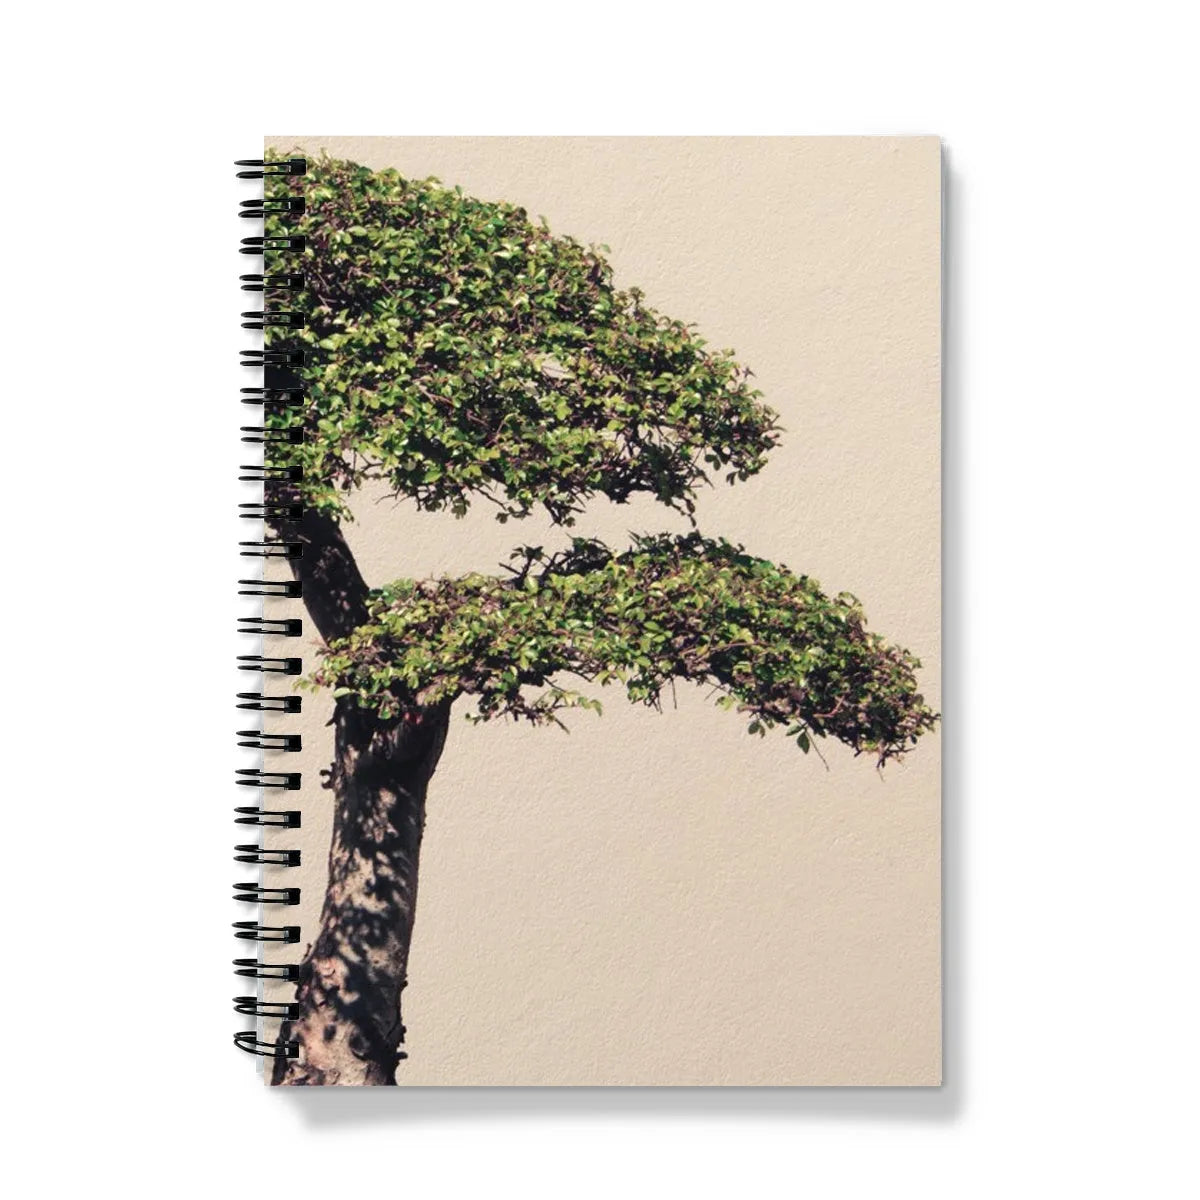 Me Myself And Bonsai Notebook - A5 - Graph Paper - Notebooks & Notepads - Aesthetic Art